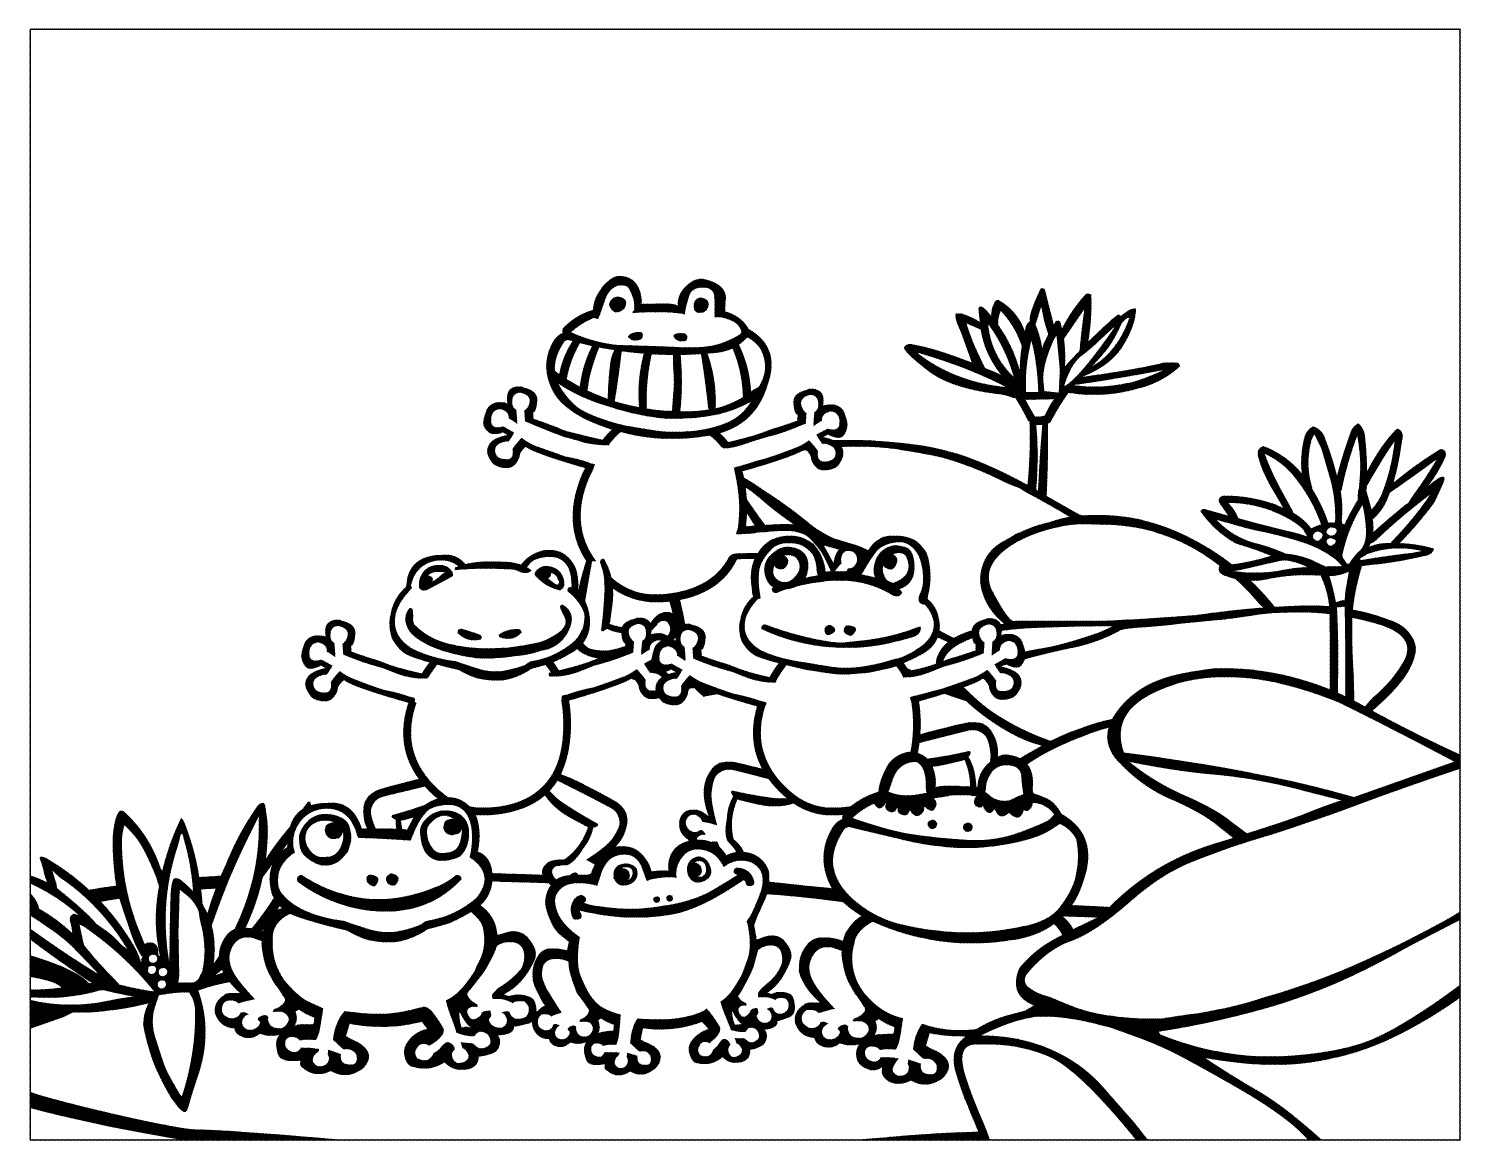 face coloring book pages - photo #45